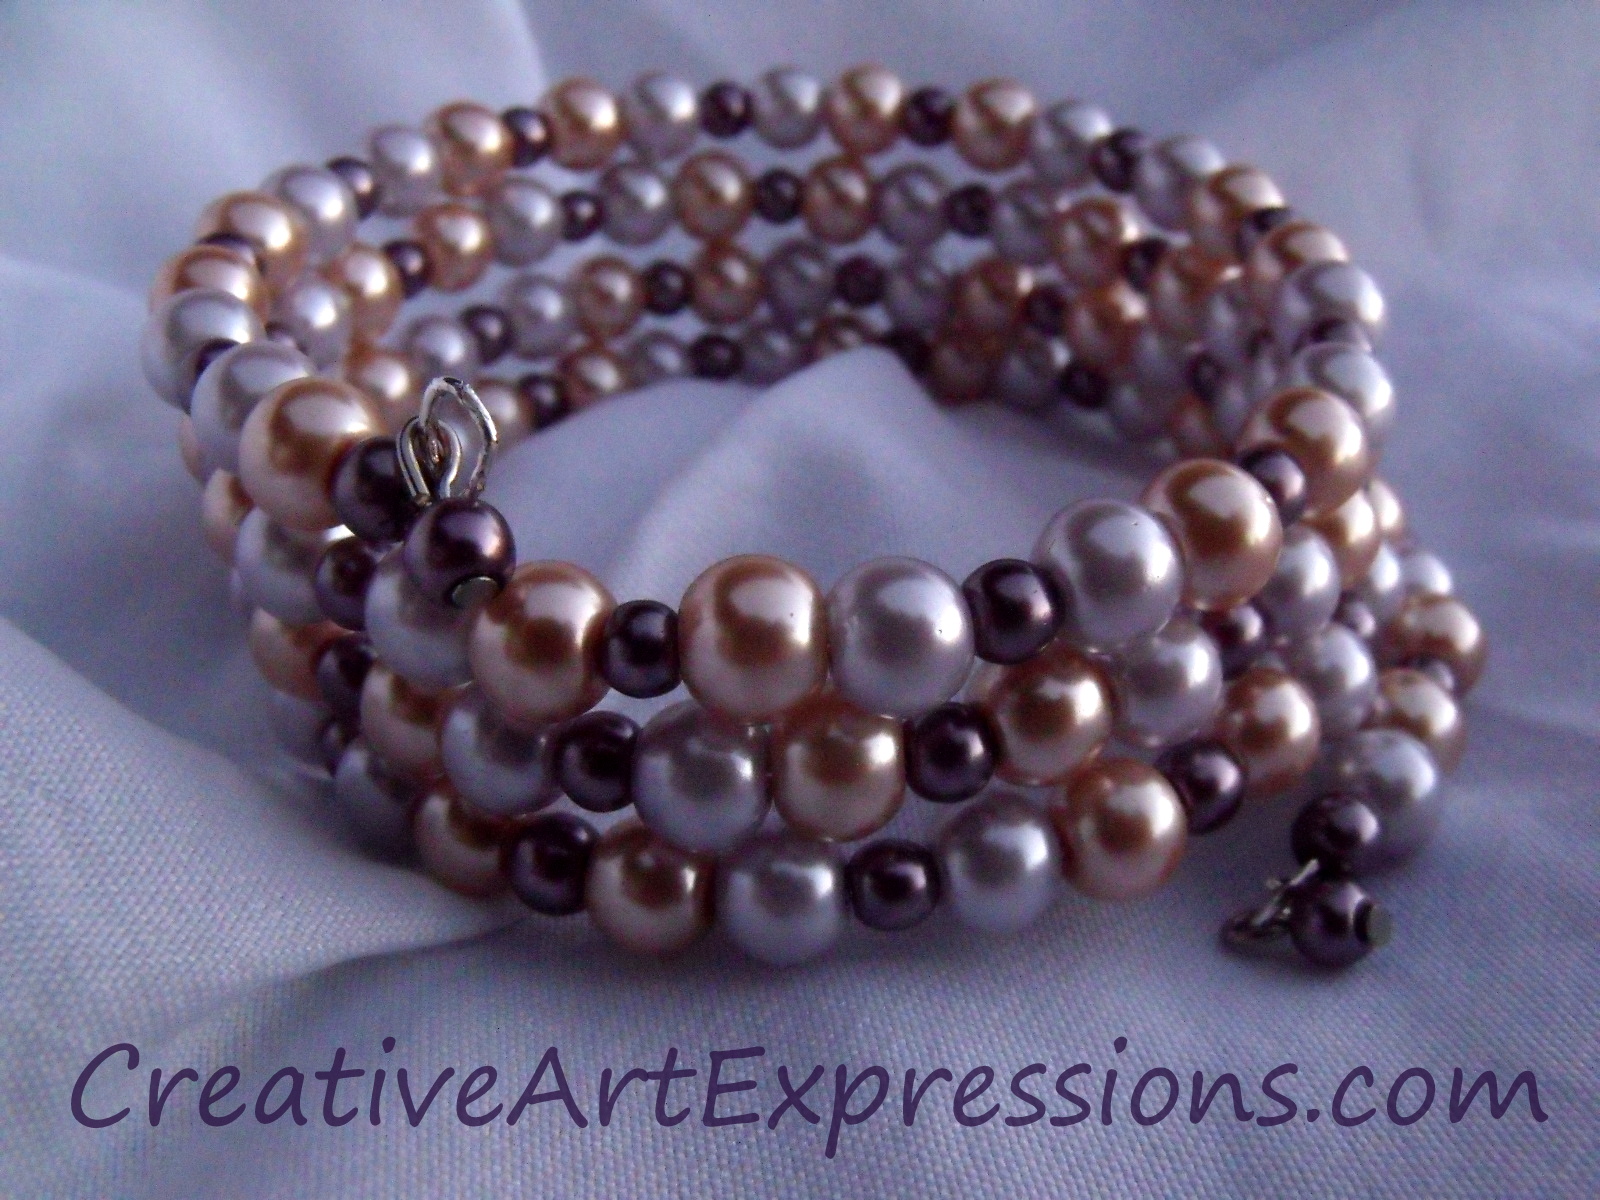 Creative Art Expressions Handmade Lavender & Champagne  Memory Wire Bracelet Jewelry Design